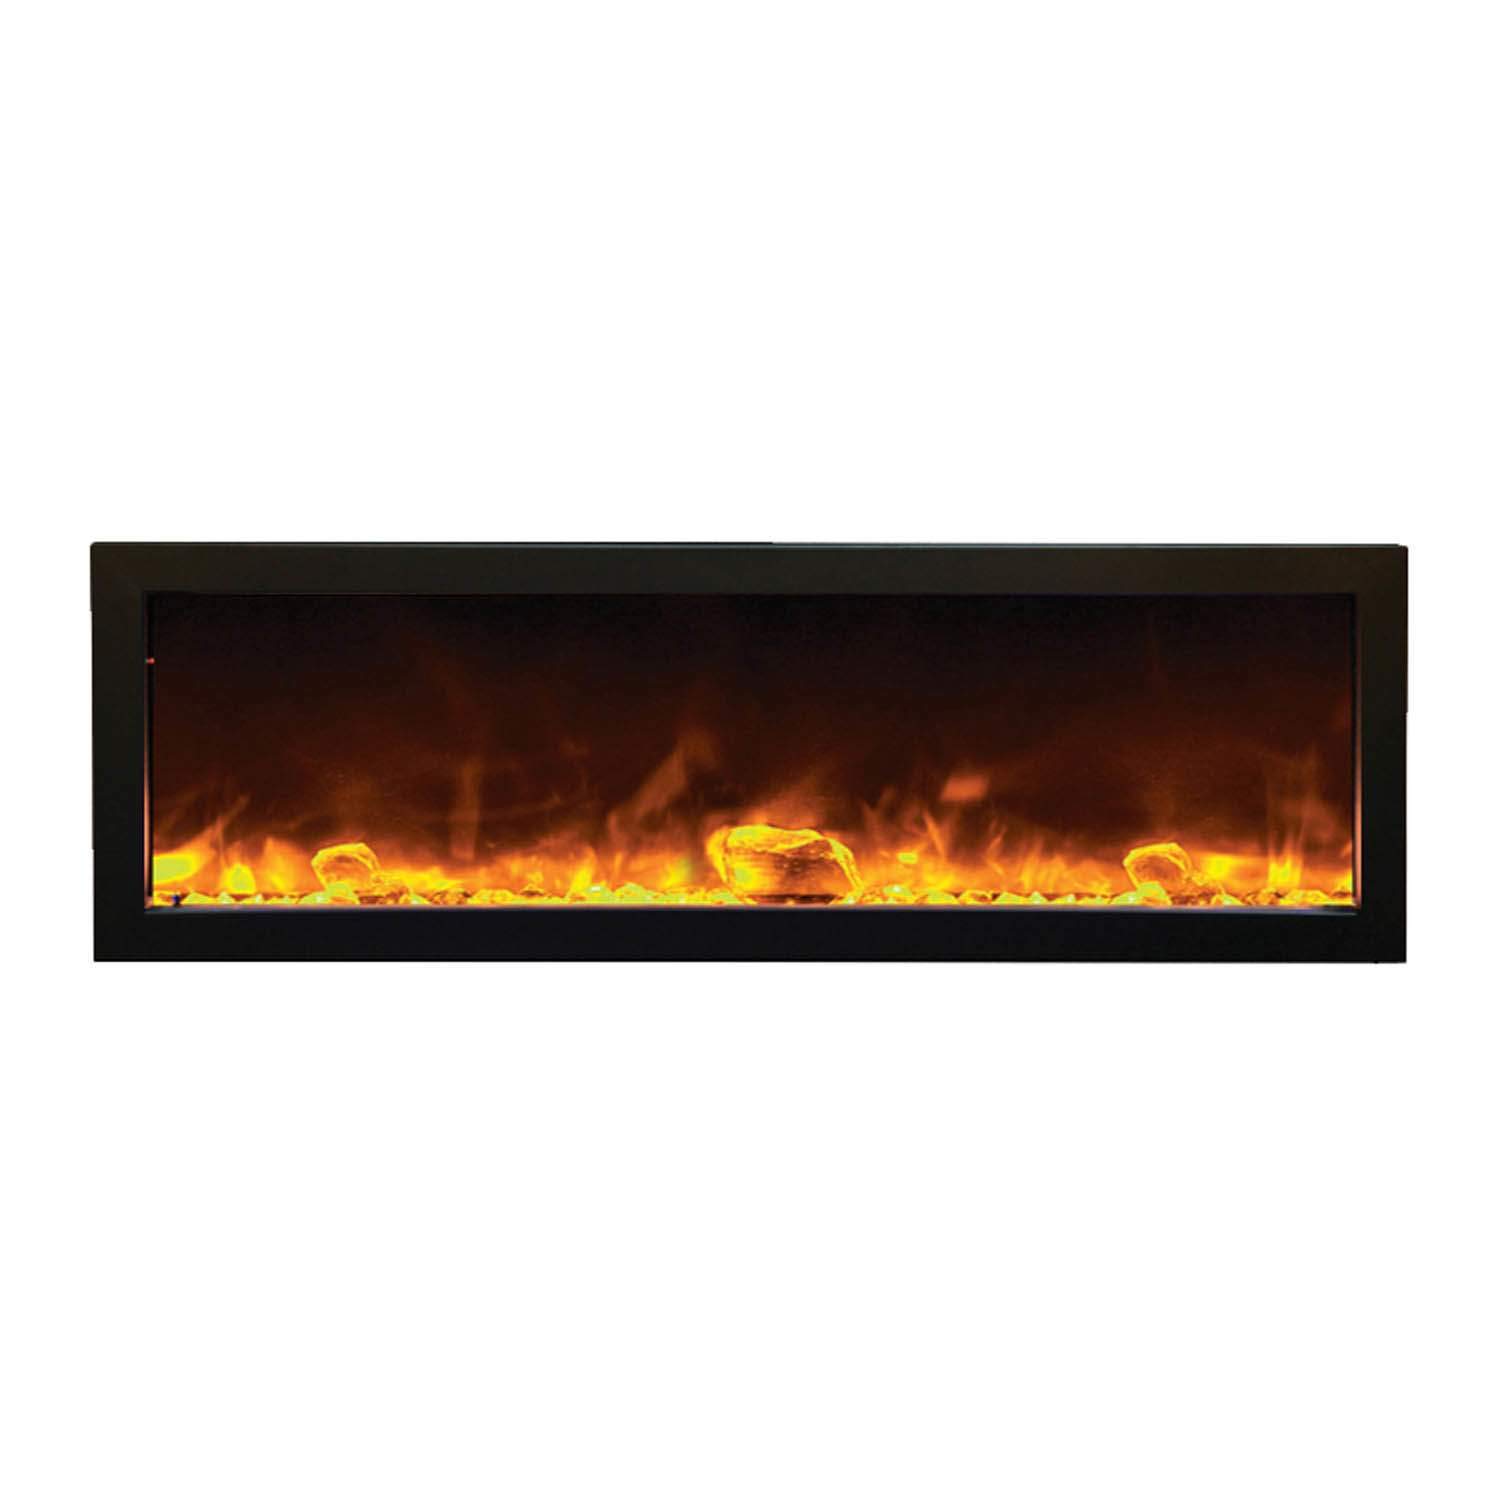 65 Inch Tv Stand with Fireplace Best Of 19 Awesome 50 Inch Recessed Electric Fireplace